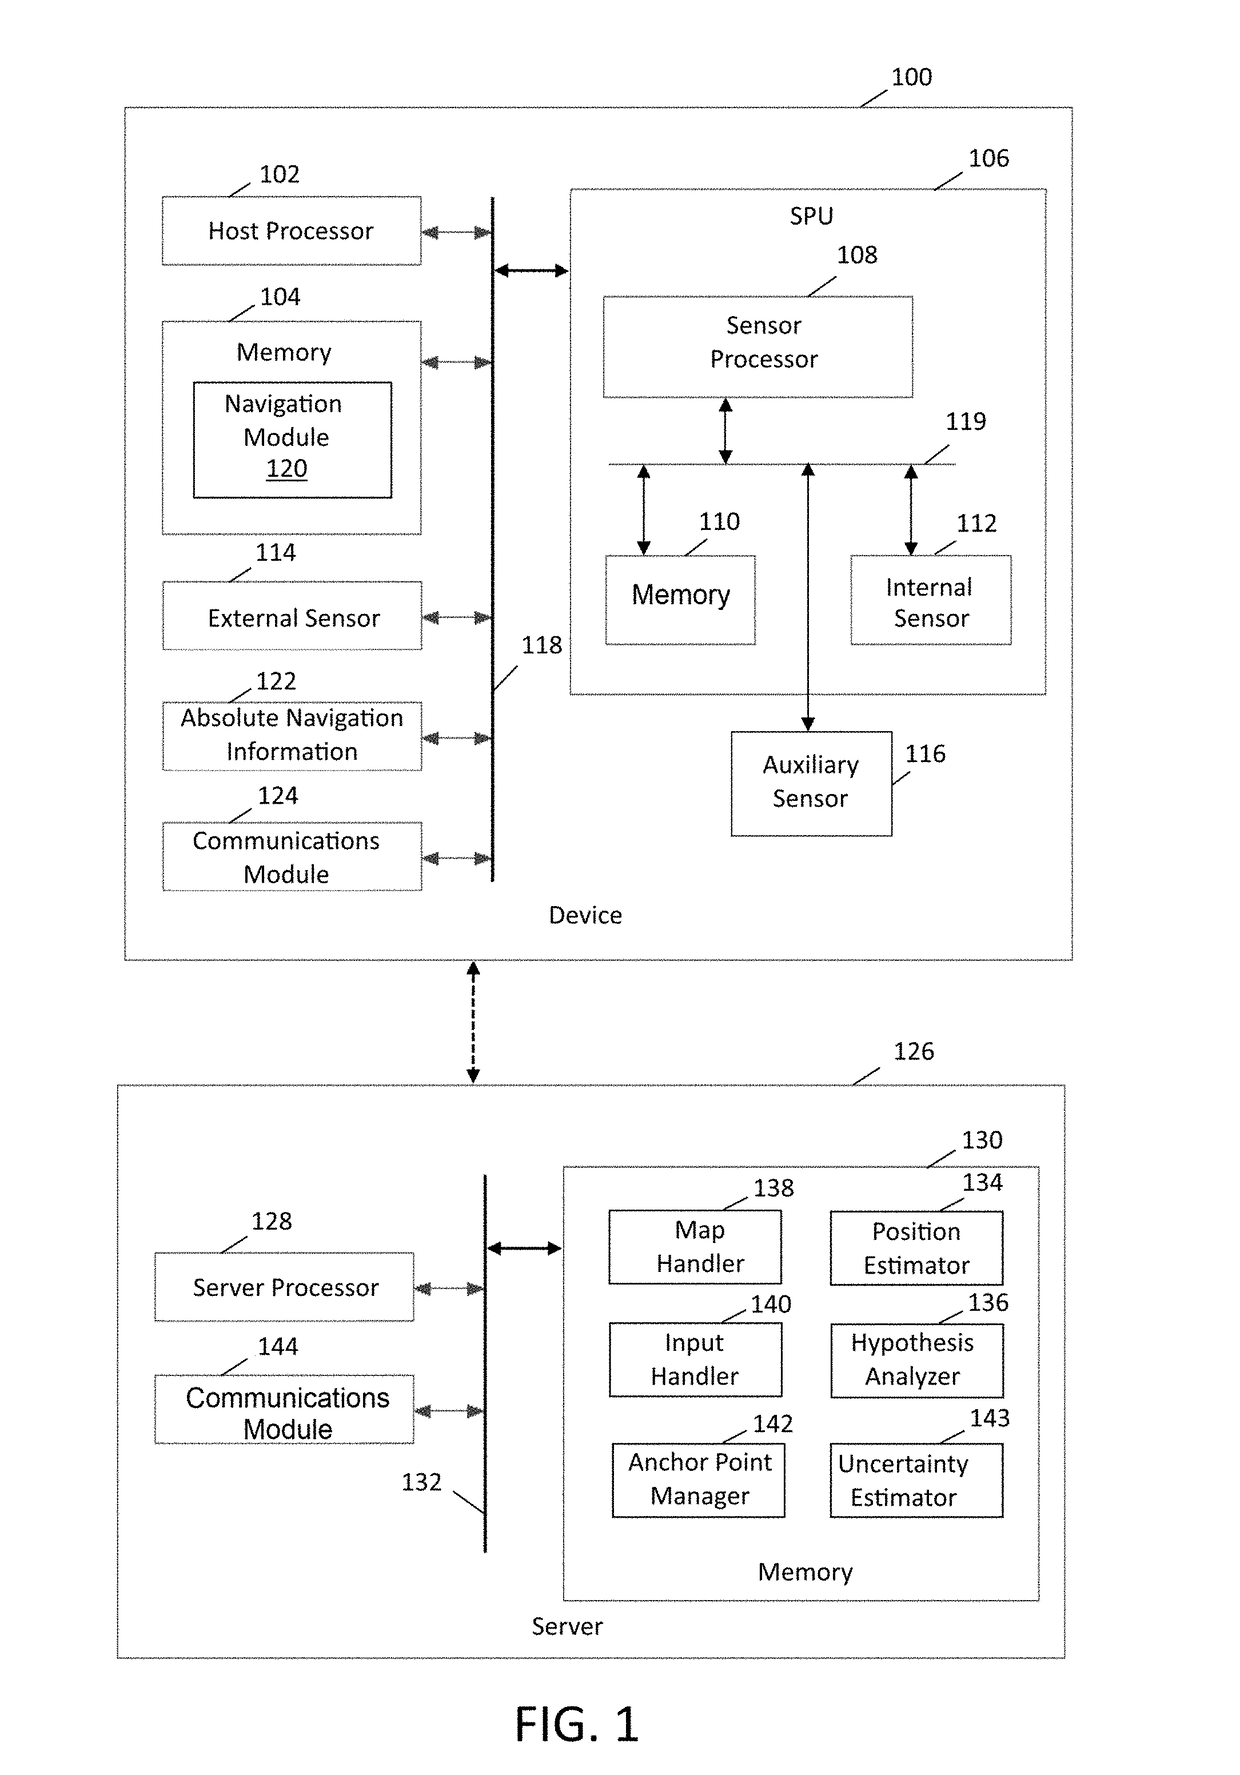 Method and system for estimating uncertainty for offline map information aided enhanced portable navigation